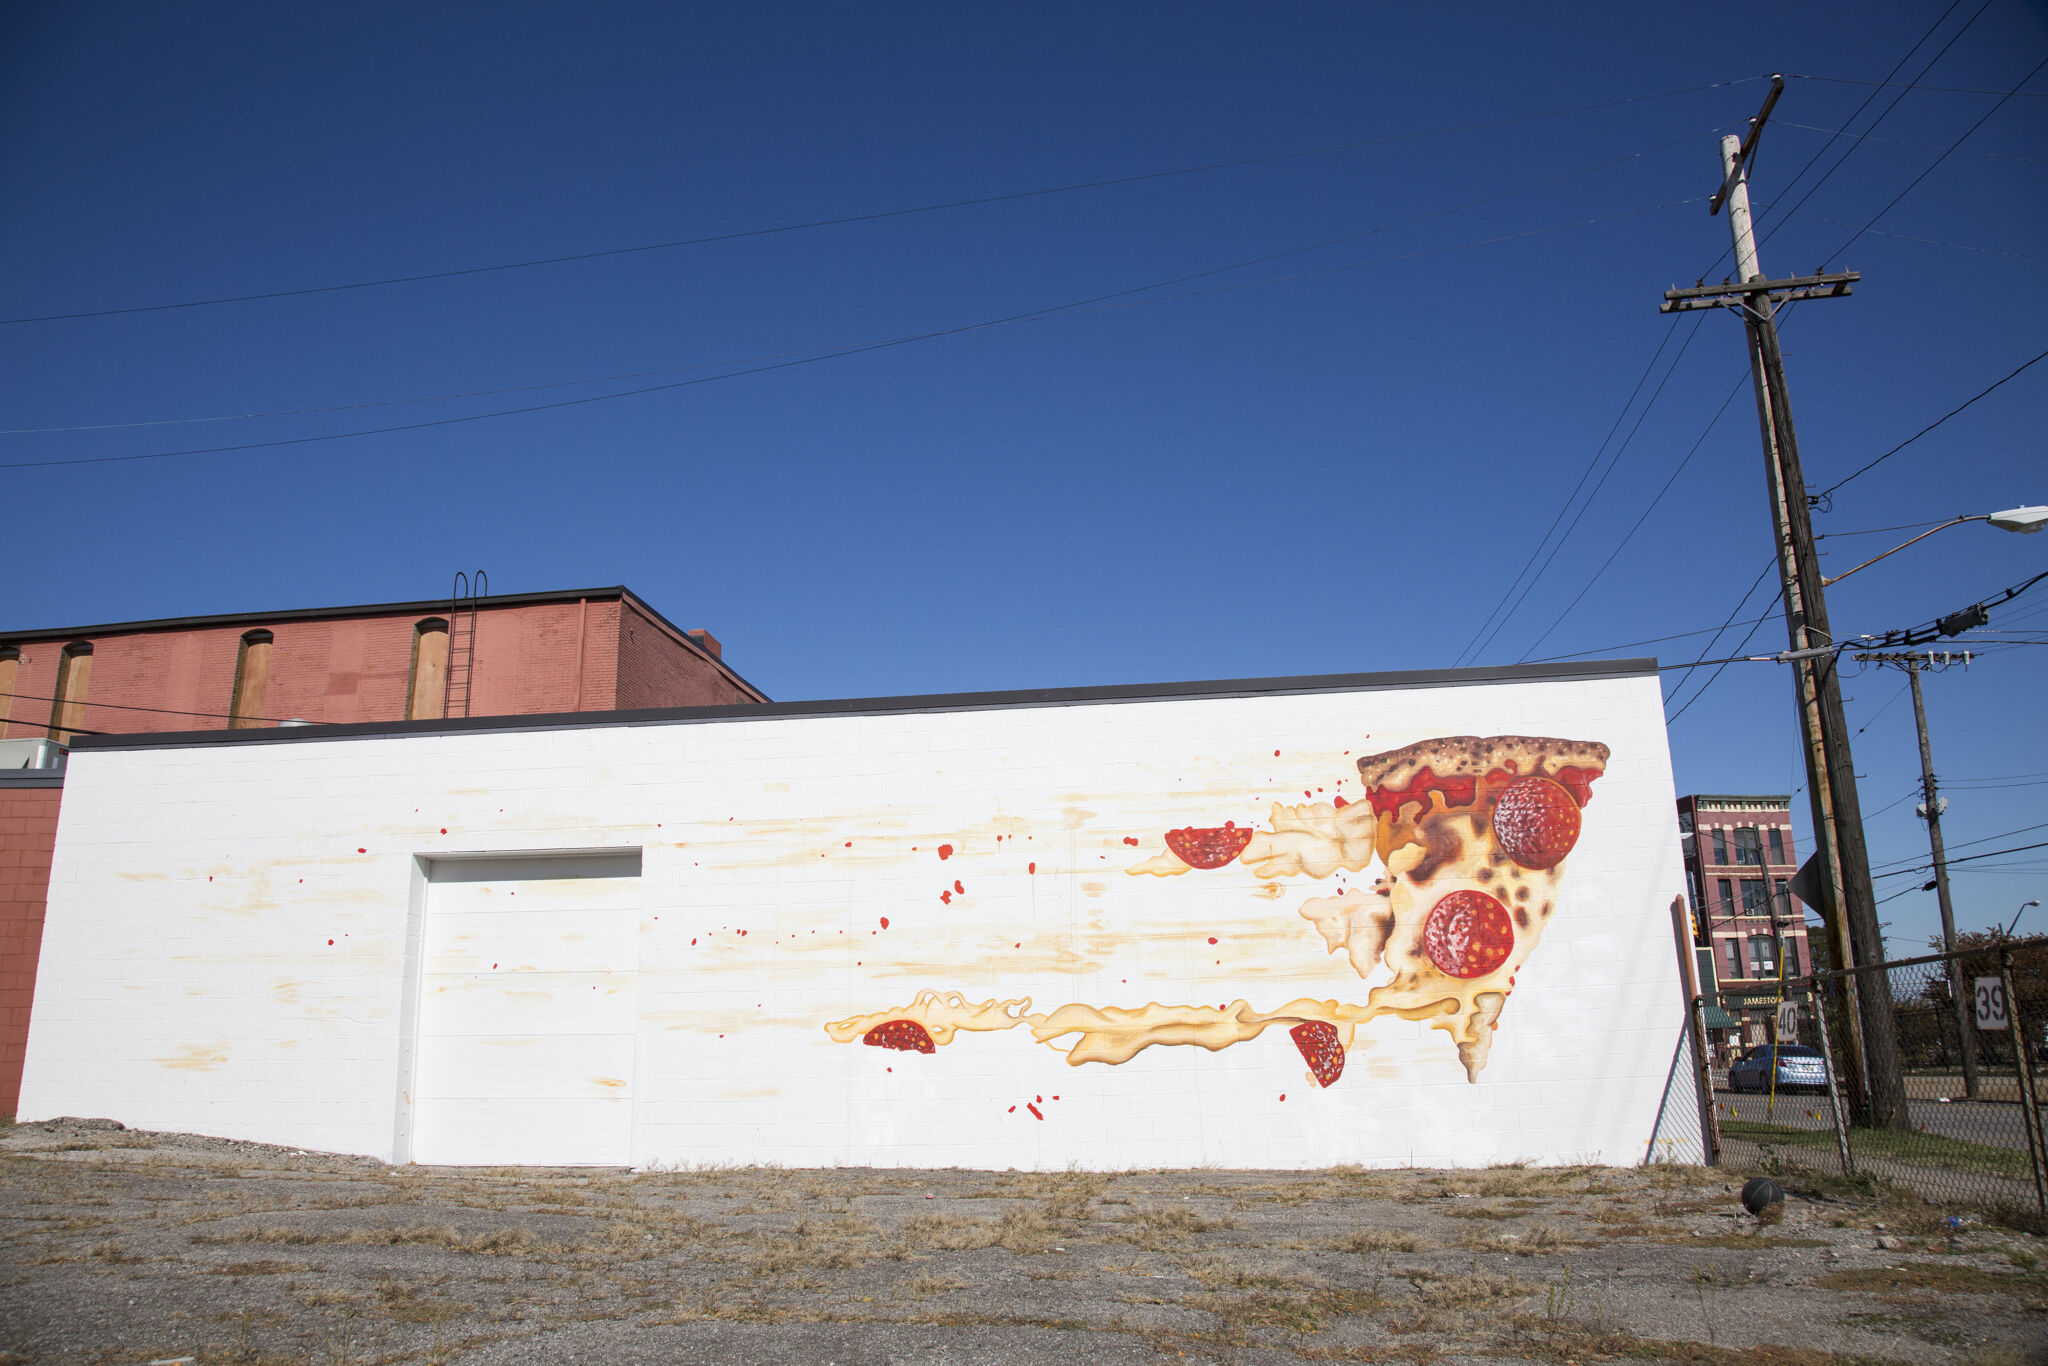 Mike Sobeck&mdash;The Pizza Mural